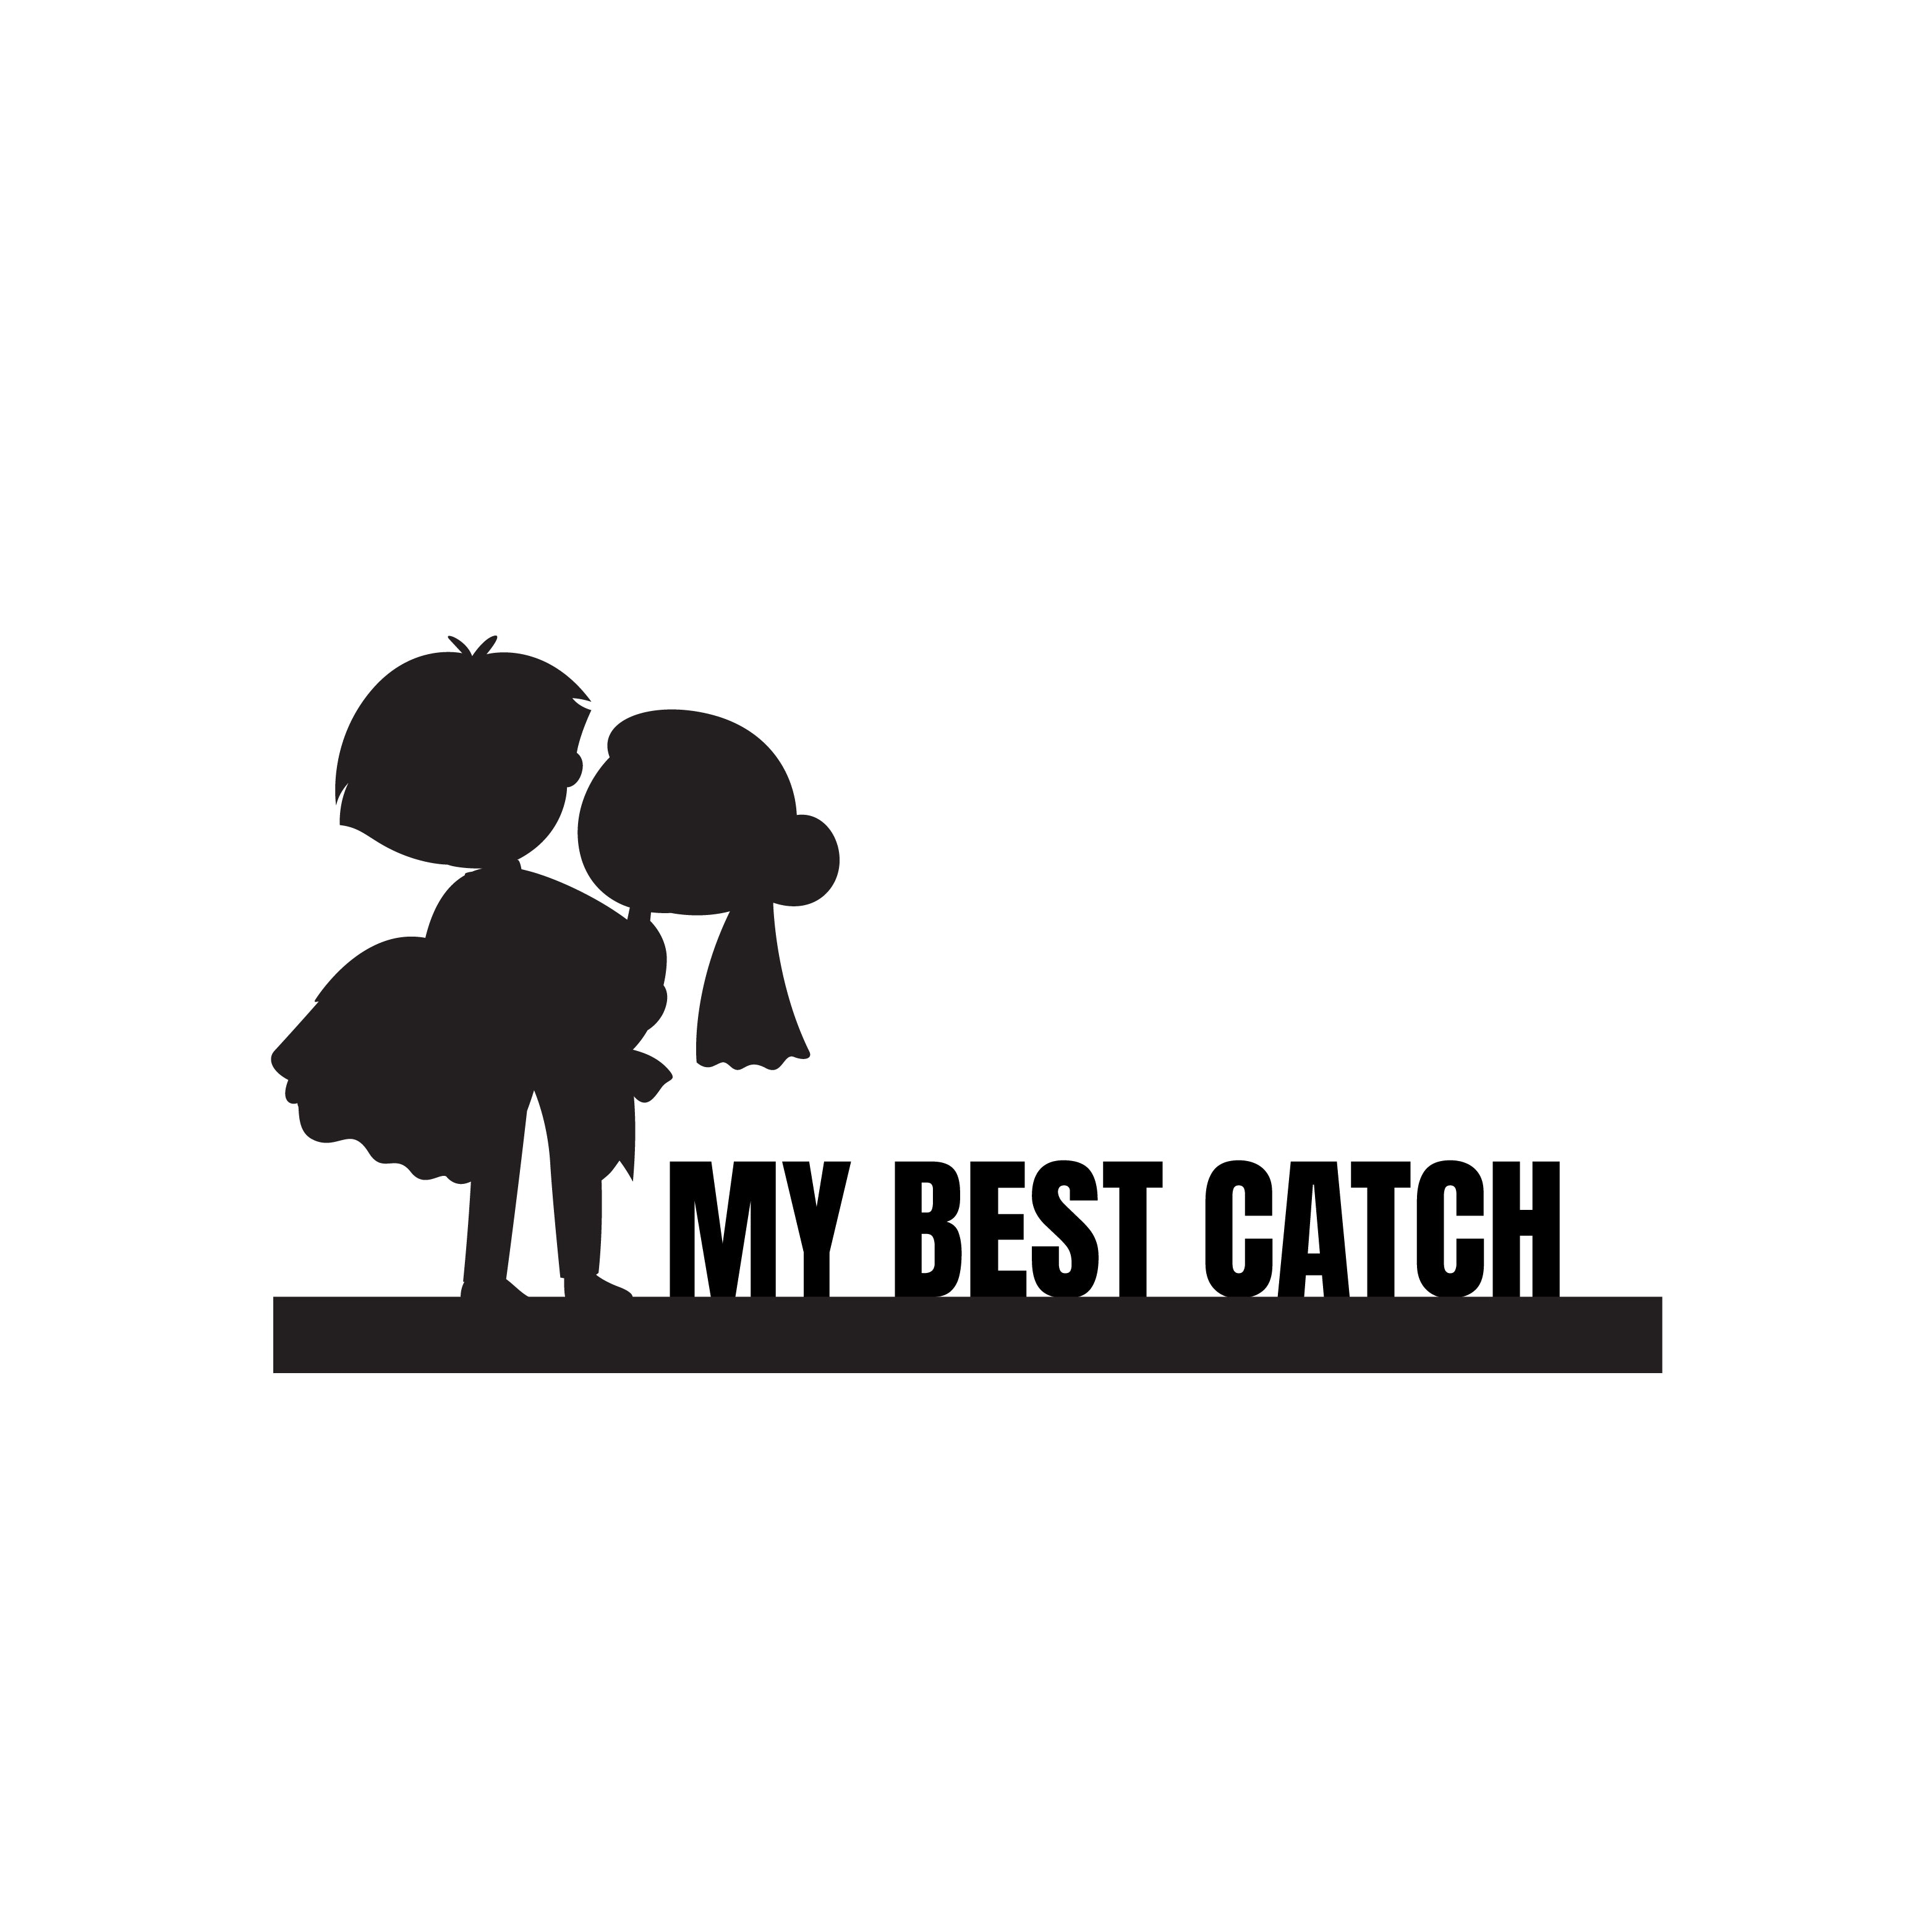 "My Best Catch" Black Engineered Wood Wall Art Cutout, Ready to Hang Home Decor 2